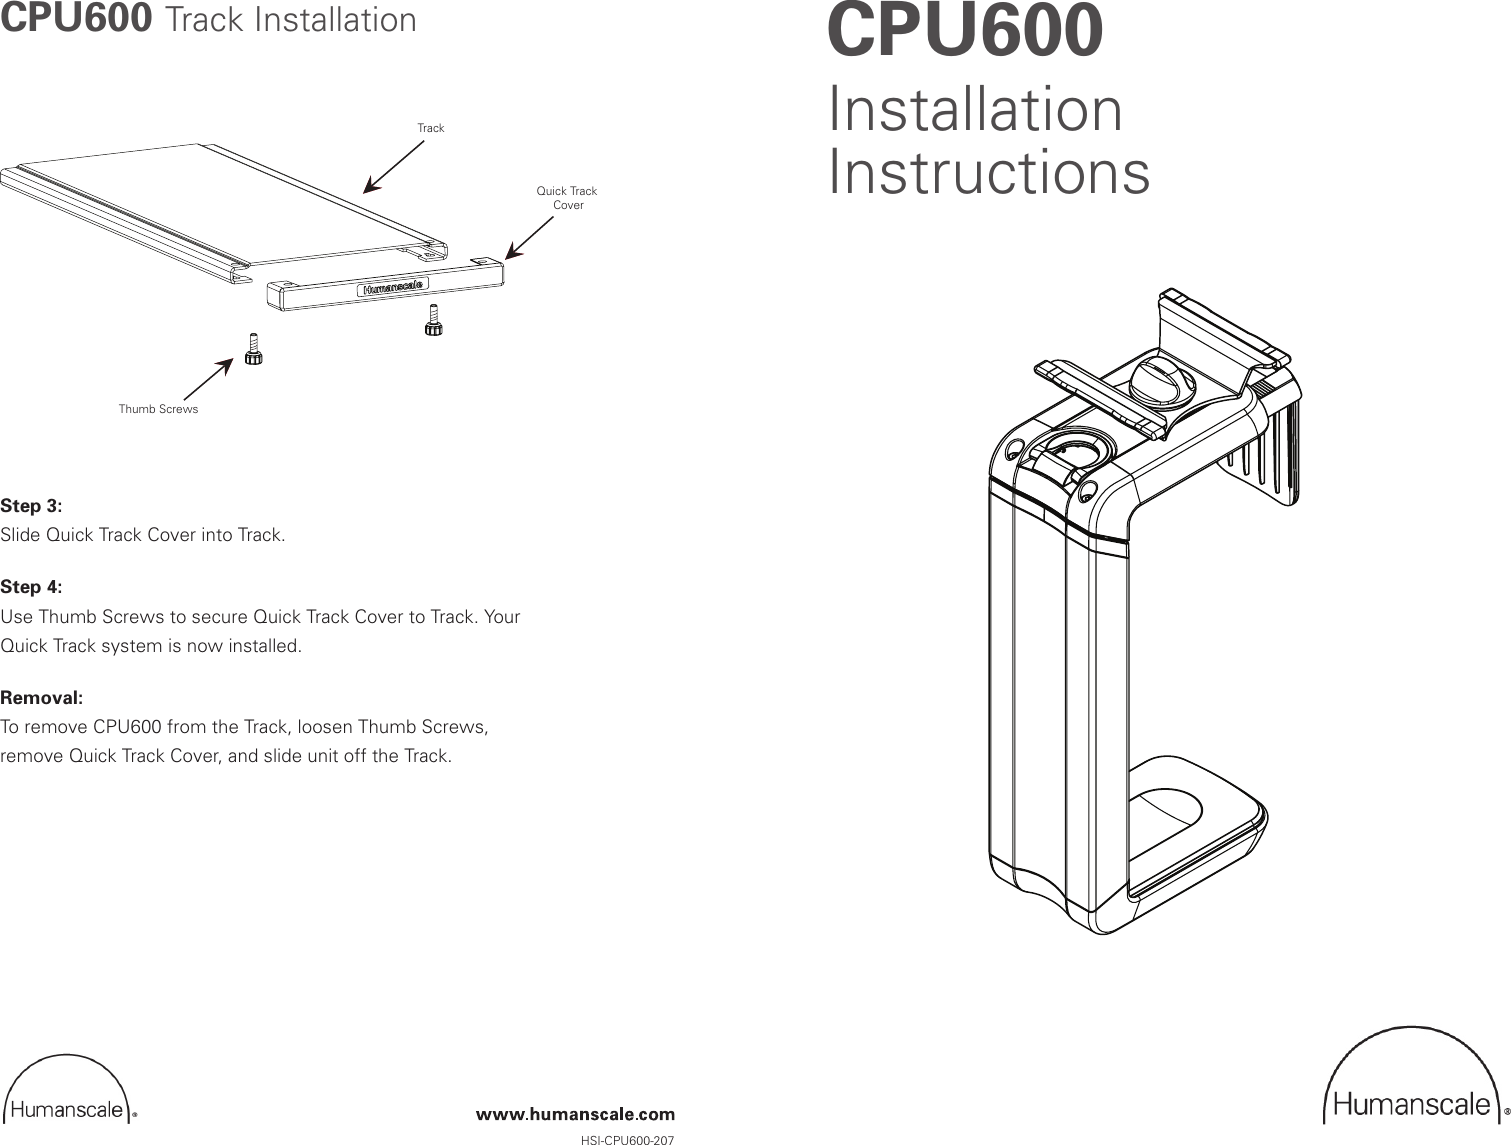 Page 1 of 2 - Cpu600instructions